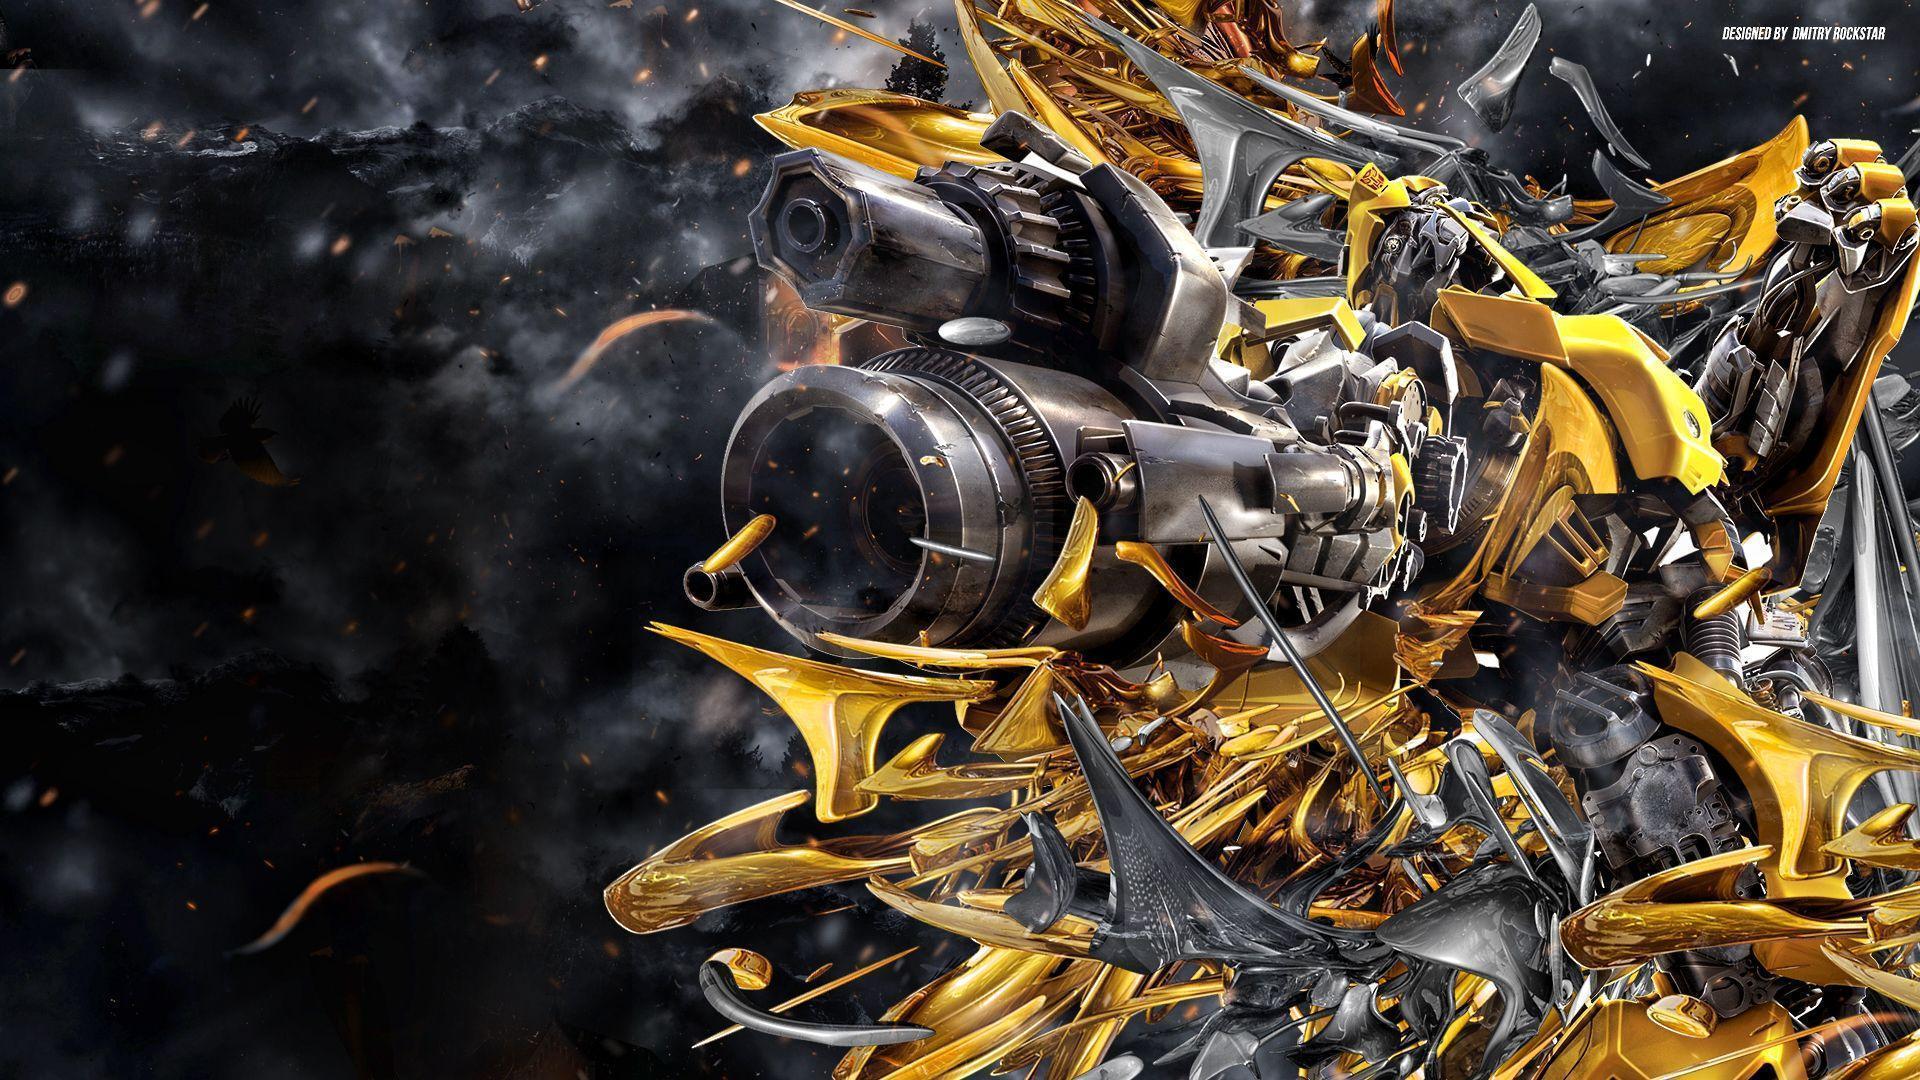 Transformers 4 Bumblebee Photo Wallpapers HD